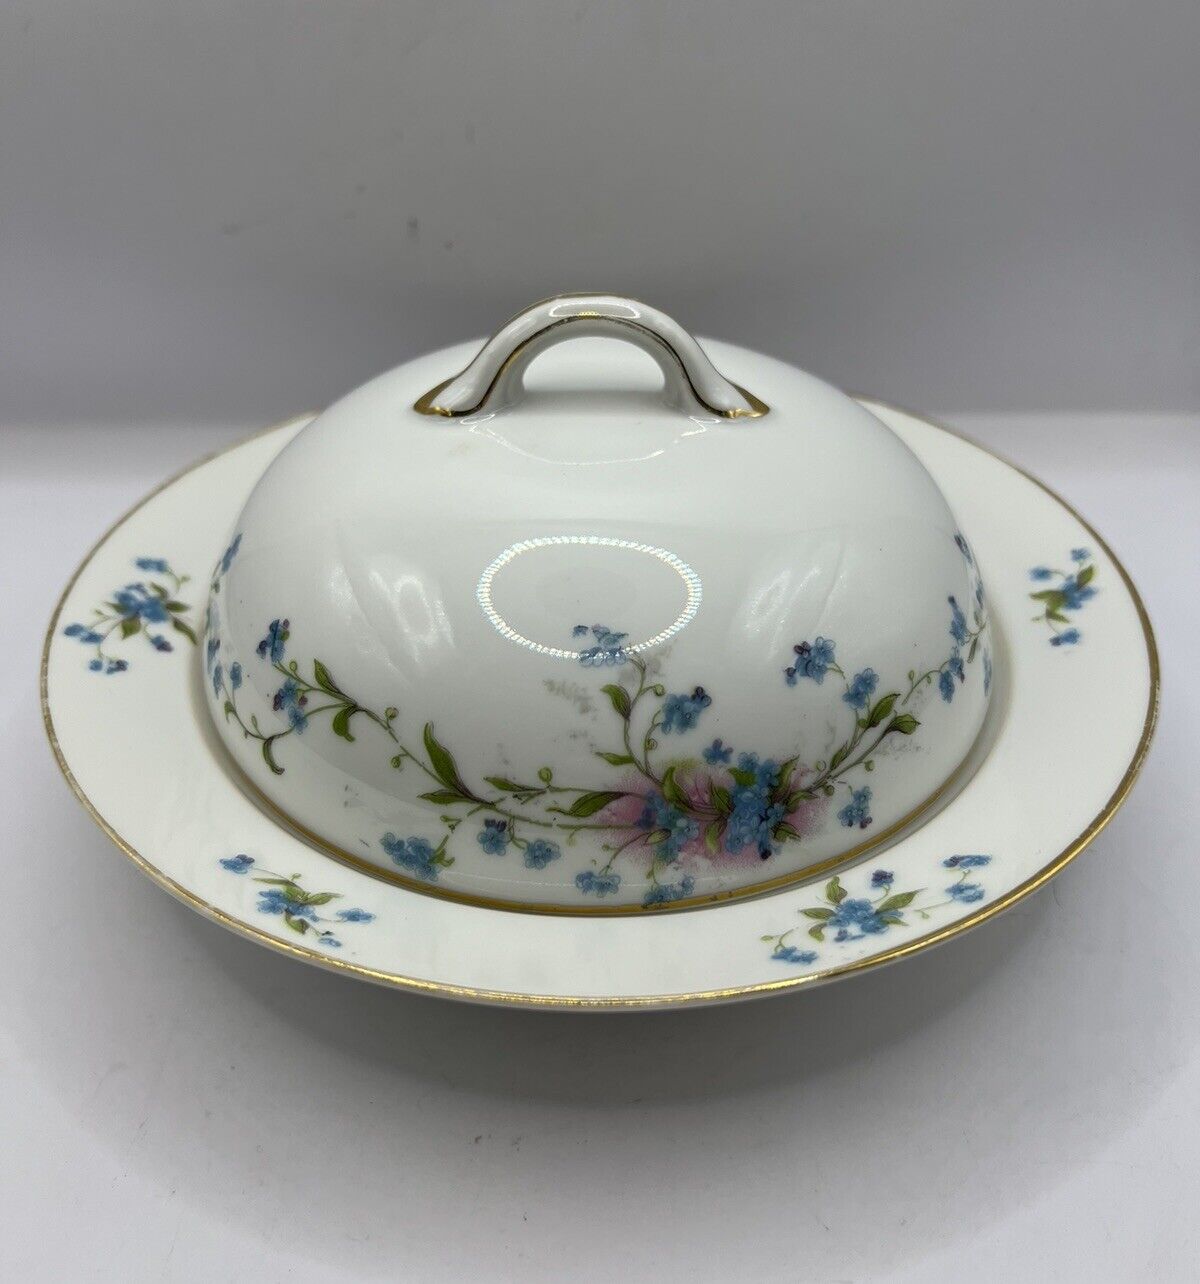 Antique Nippon Round Butter Dome Covered Dish Hand Painted Blue Flowers